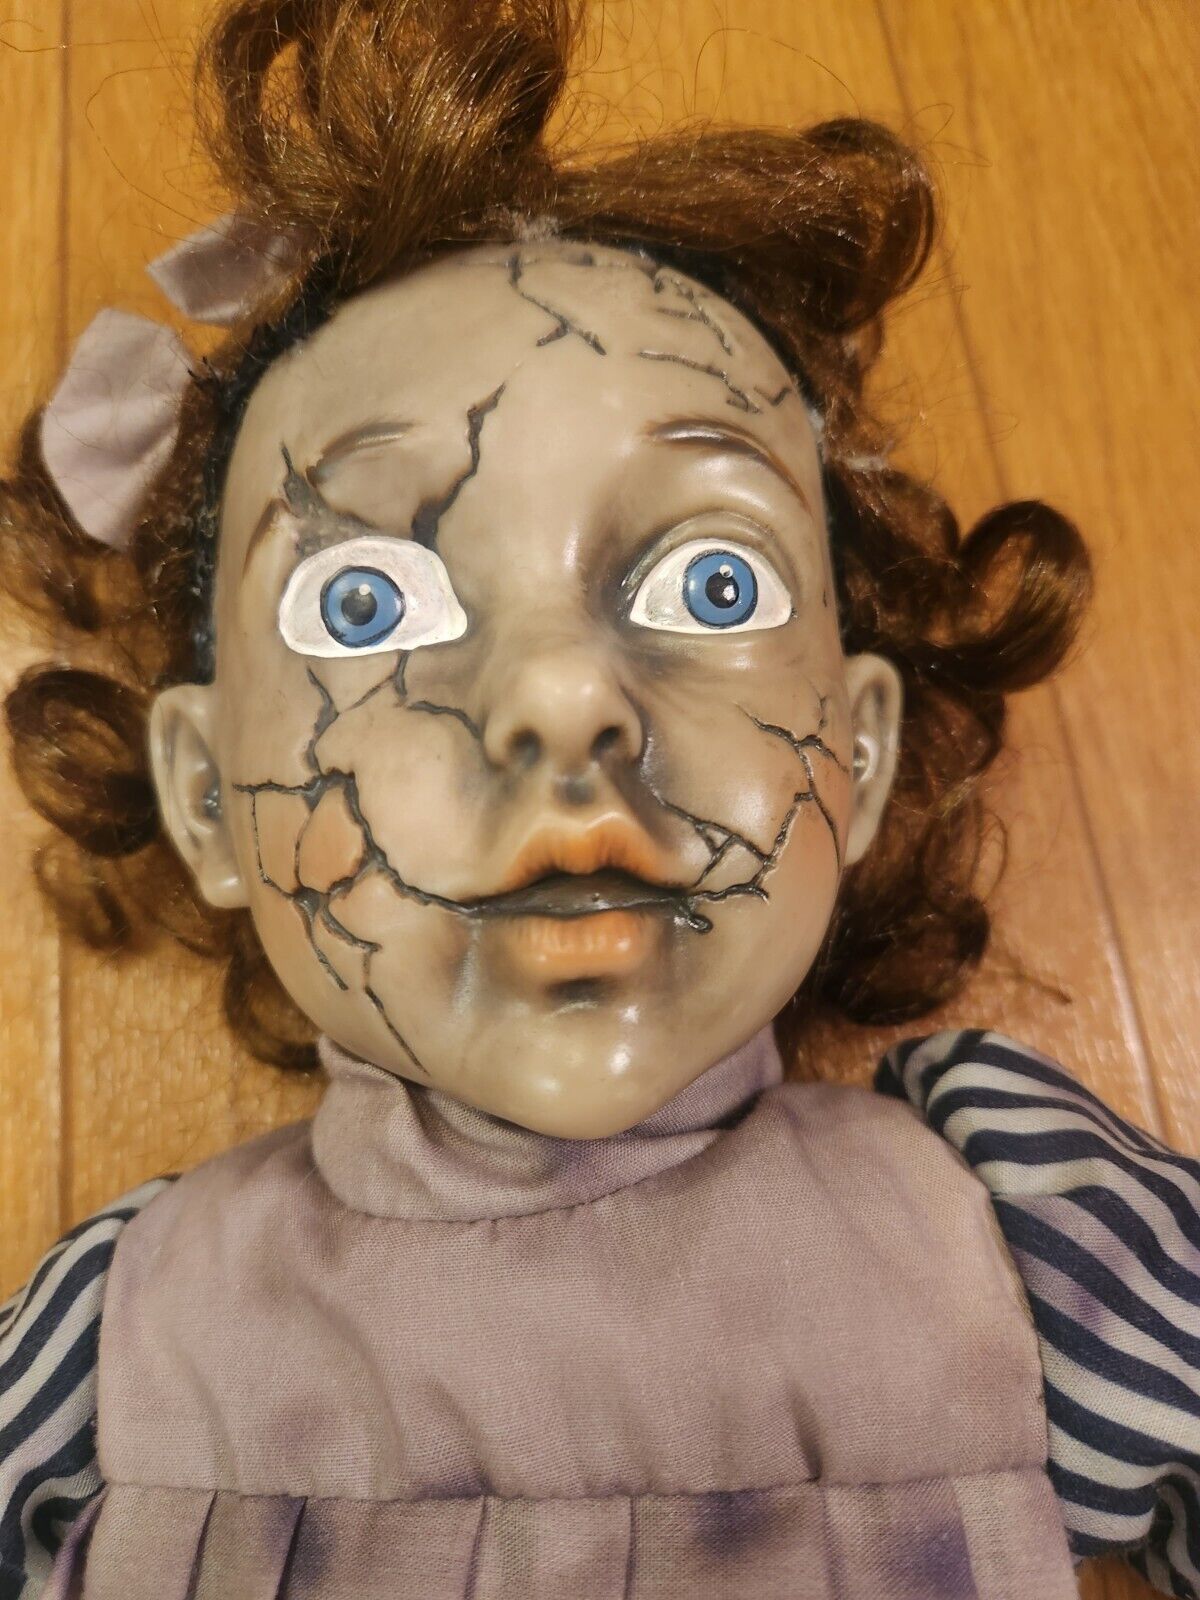 Collectable Halloween Scary Creepy Doll ( Talks and Plays Music)